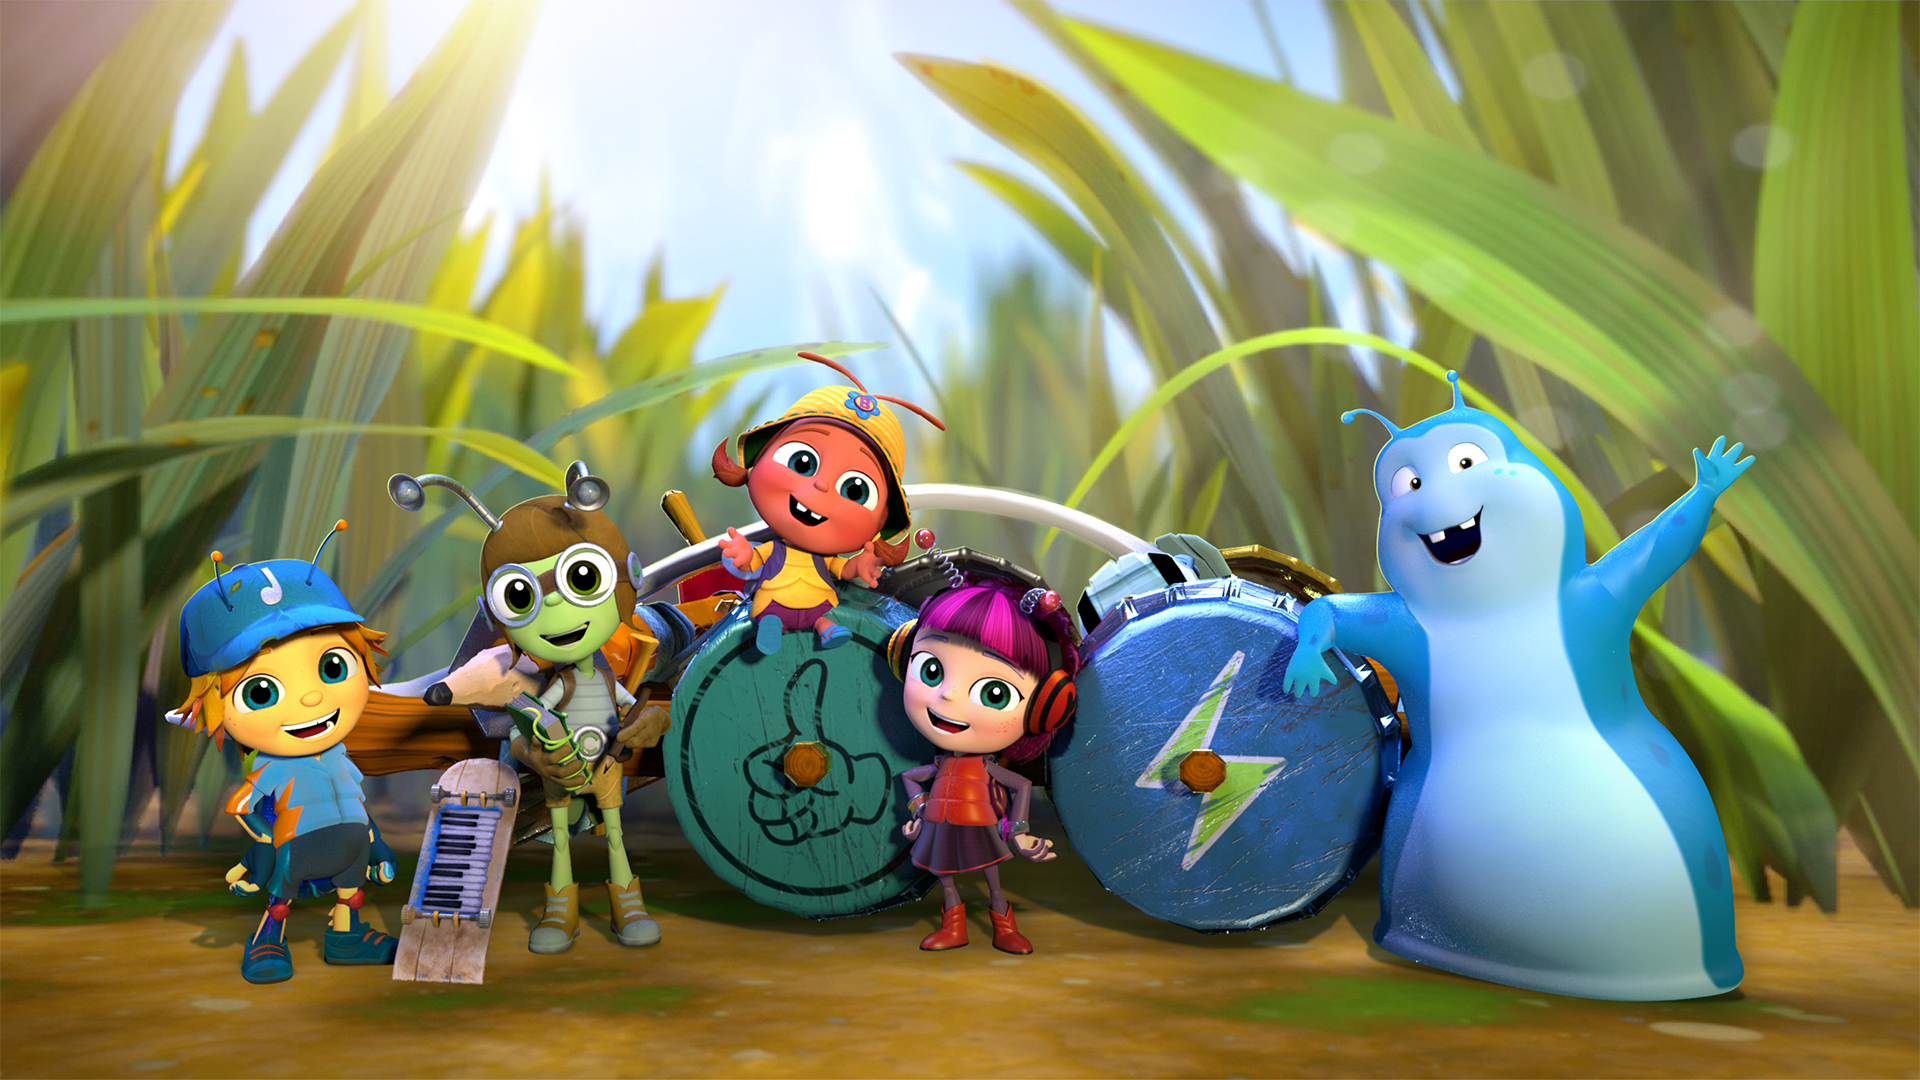 Beat Bugs Wallpapers